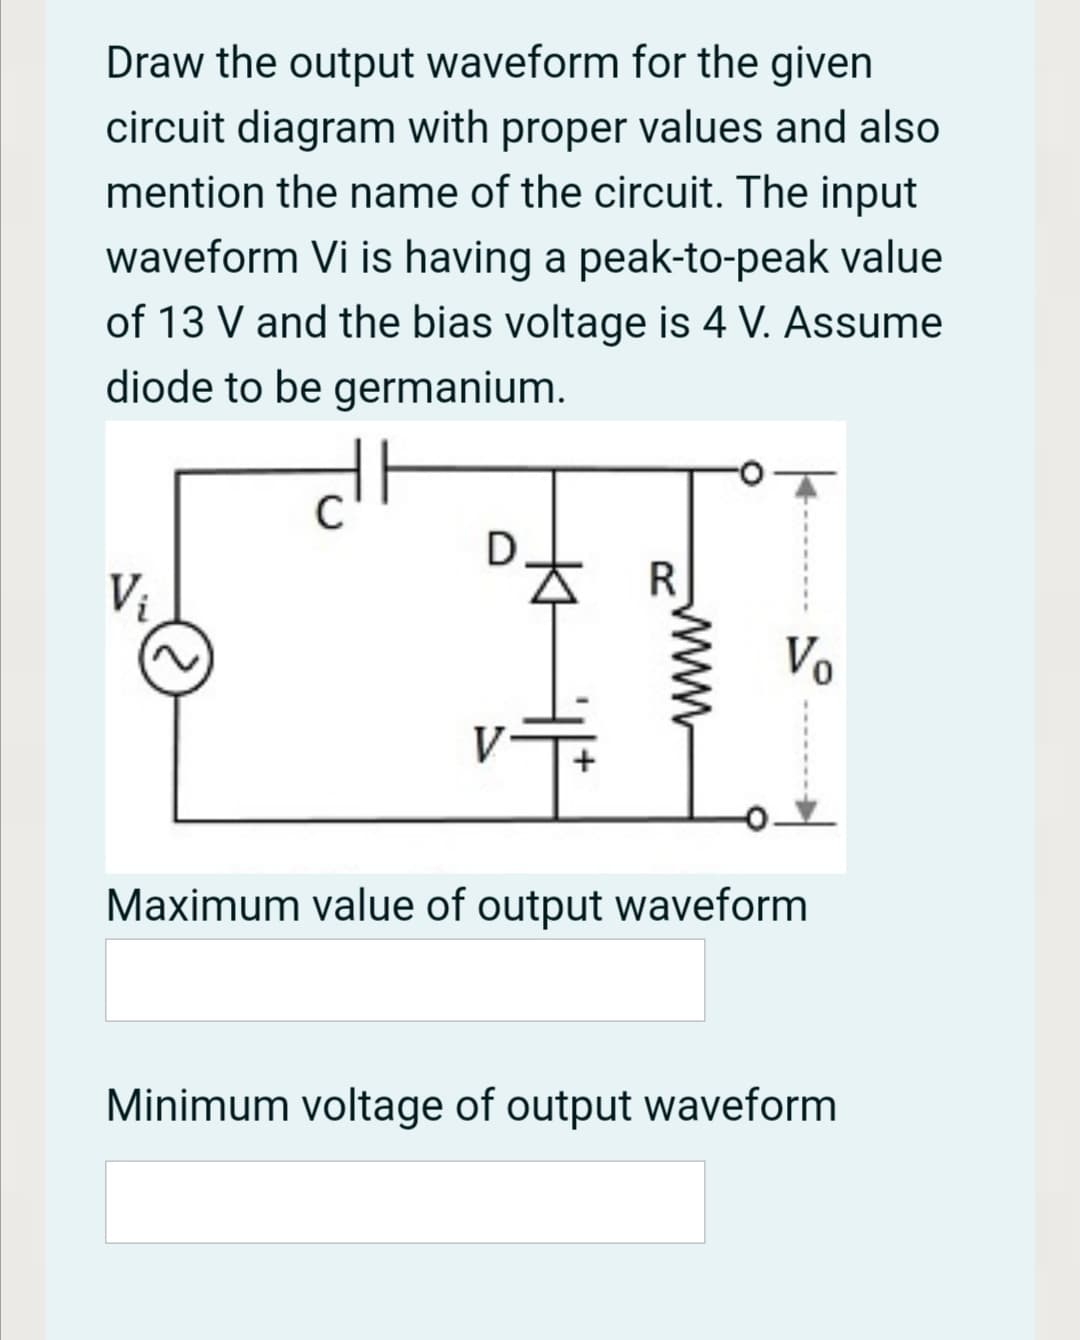 Draw the output waveform for the given
circuit diagram with proper values and also
mention the name of the circuit. The input
waveform Vi is having a peak-to-peak value
of 13 V and the bias voltage is 4 V. Assume
diode to be germanium.
R
Vị
Vo
Maximum value of output waveform
Minimum voltage of output waveform
